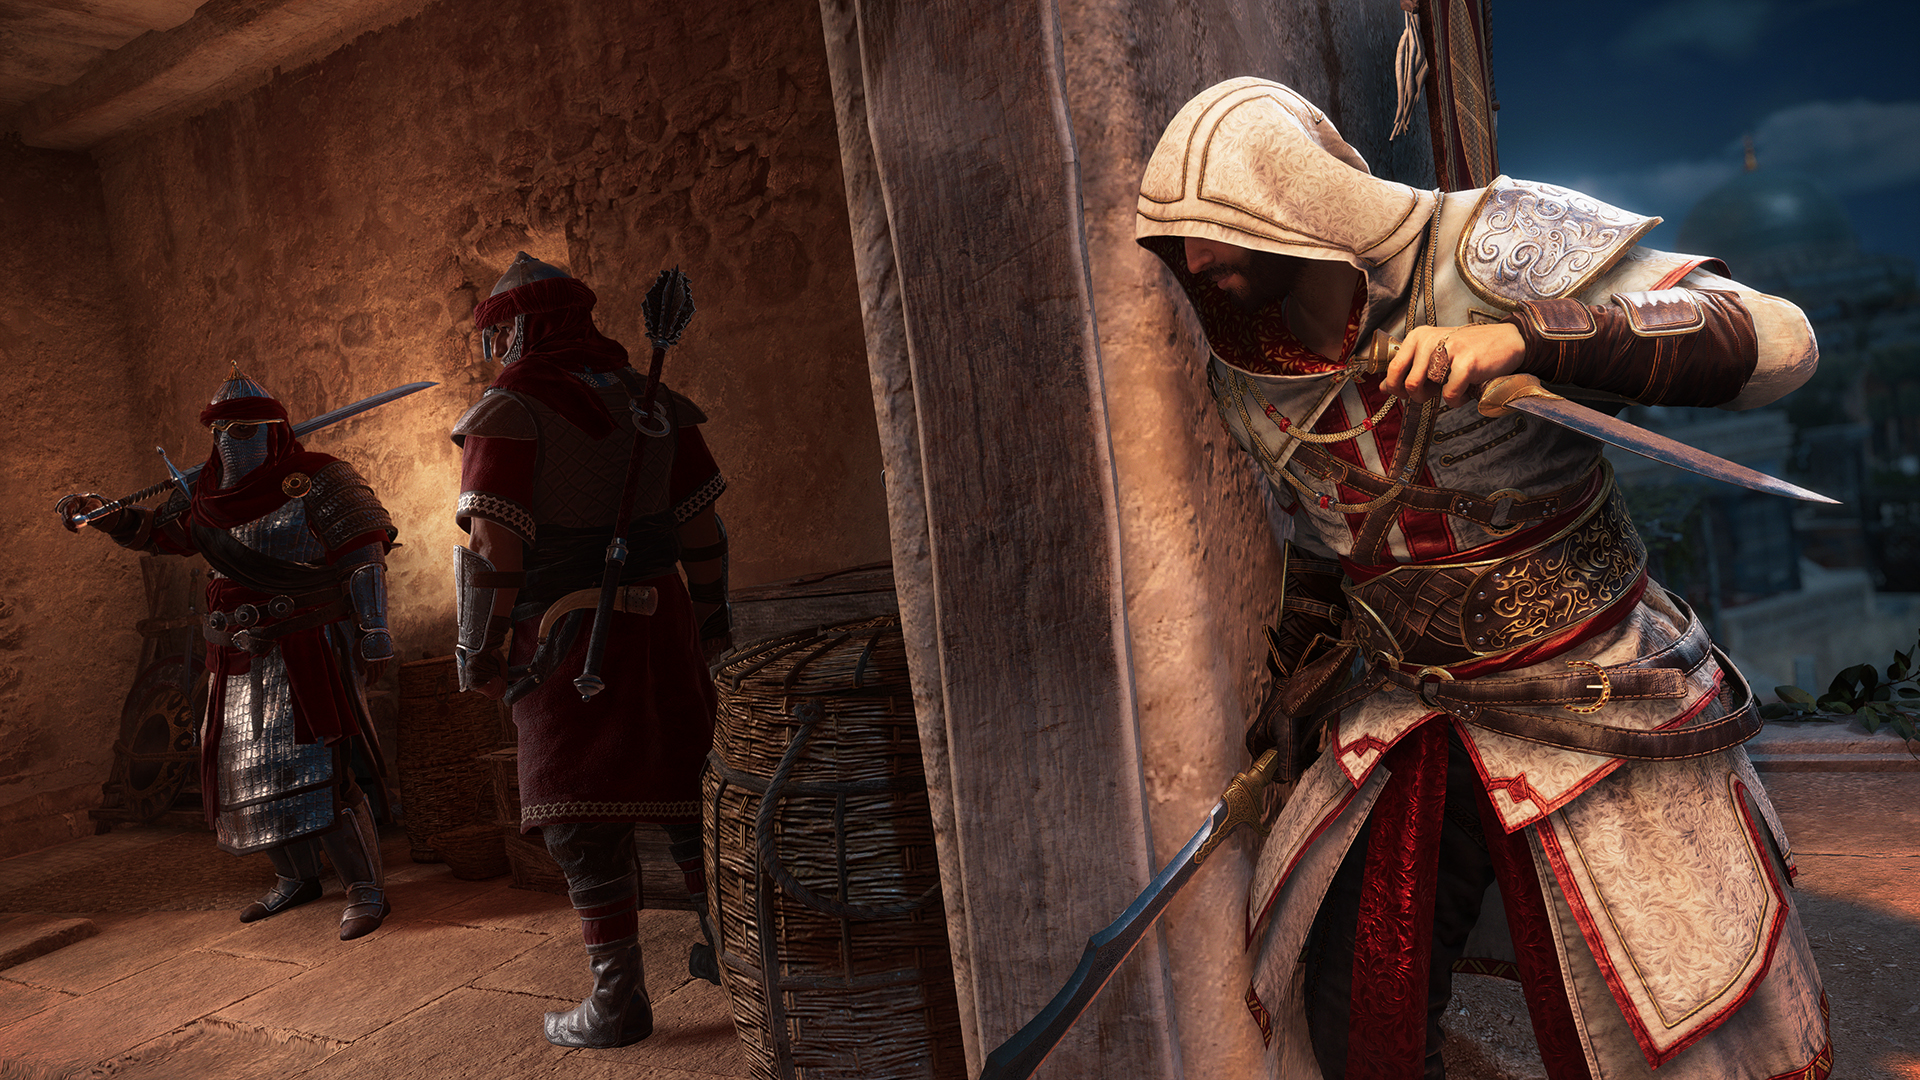 Basim, from Assassin’s creed Mirage, looking around a corner with his sword and dagger at the ready. On the left two guards are seen keeping watch.